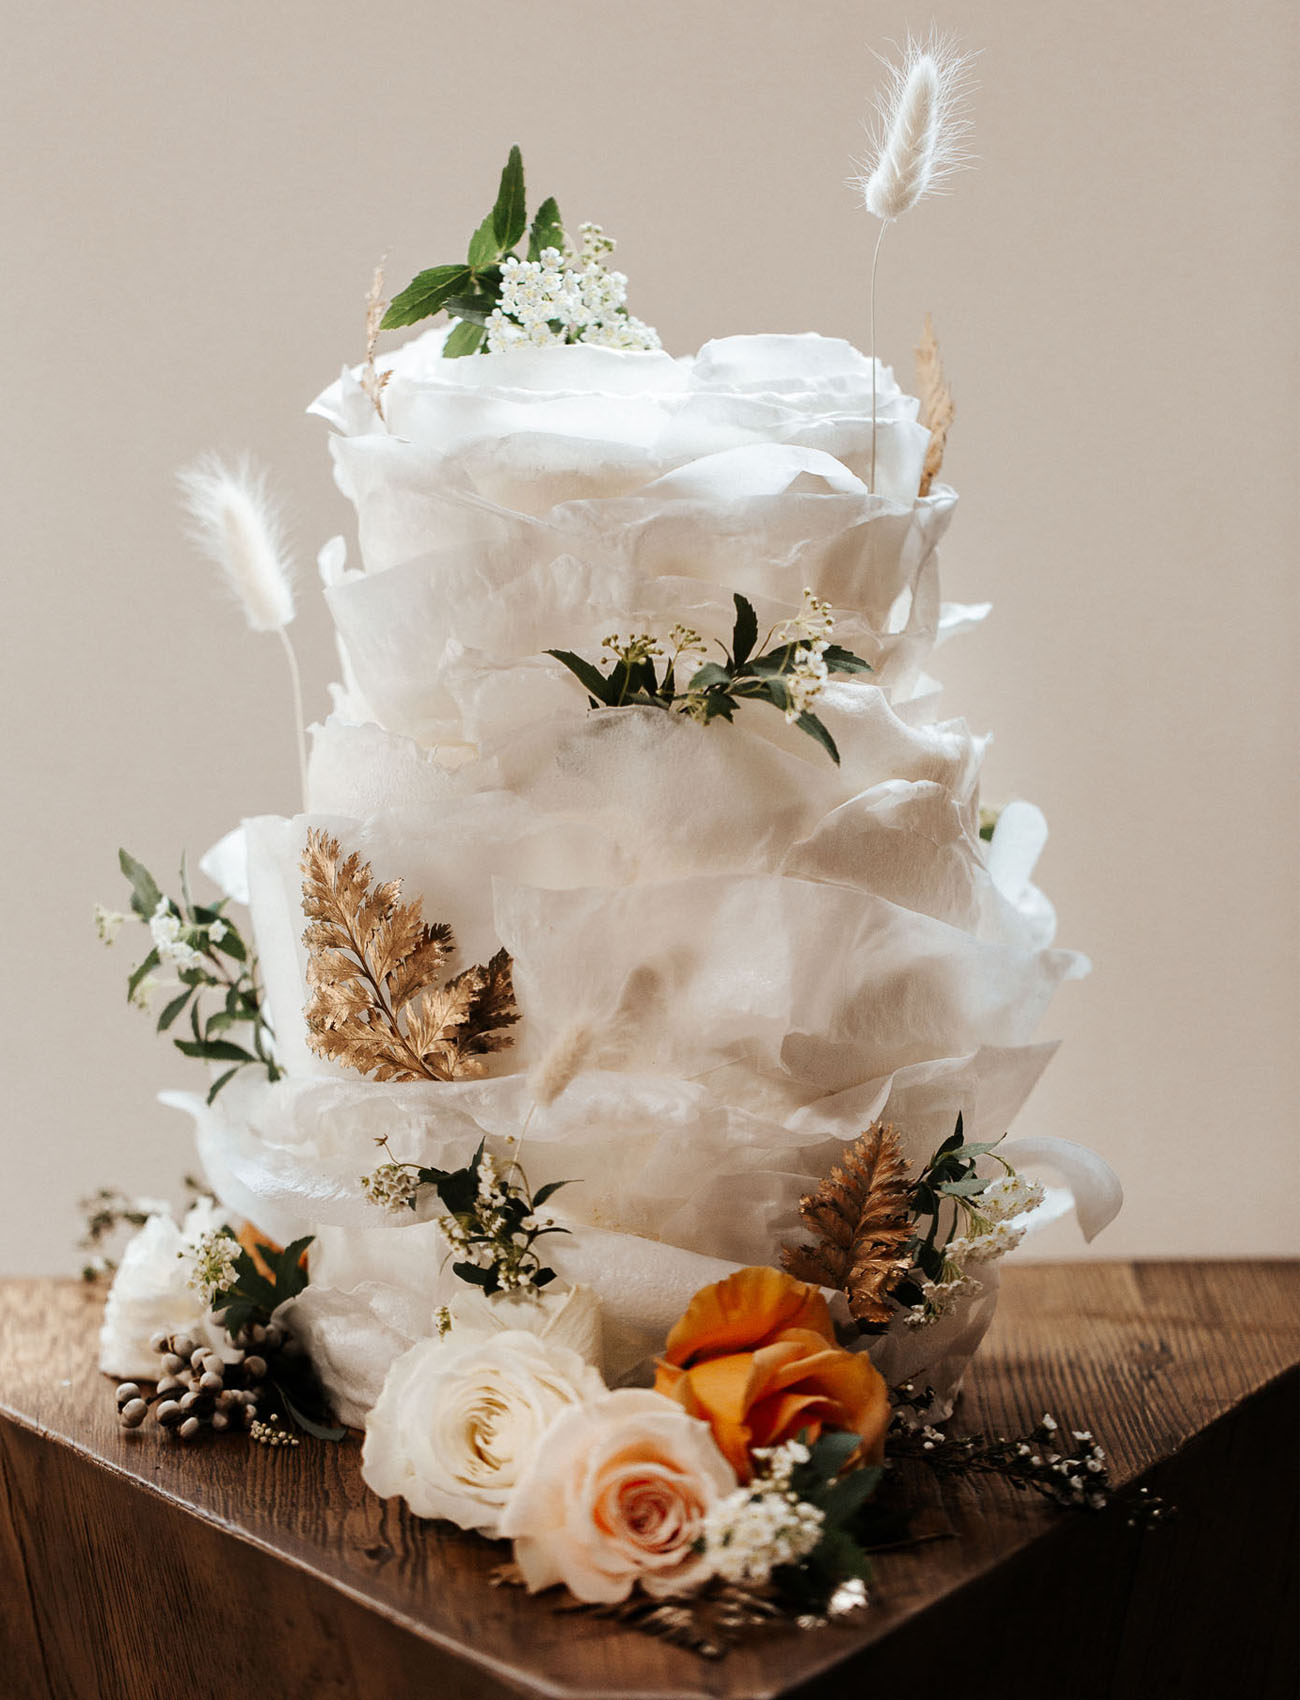 I'm in love with this gorgeous wedding cake with lots of layers and gilded leaves, it looks incredible